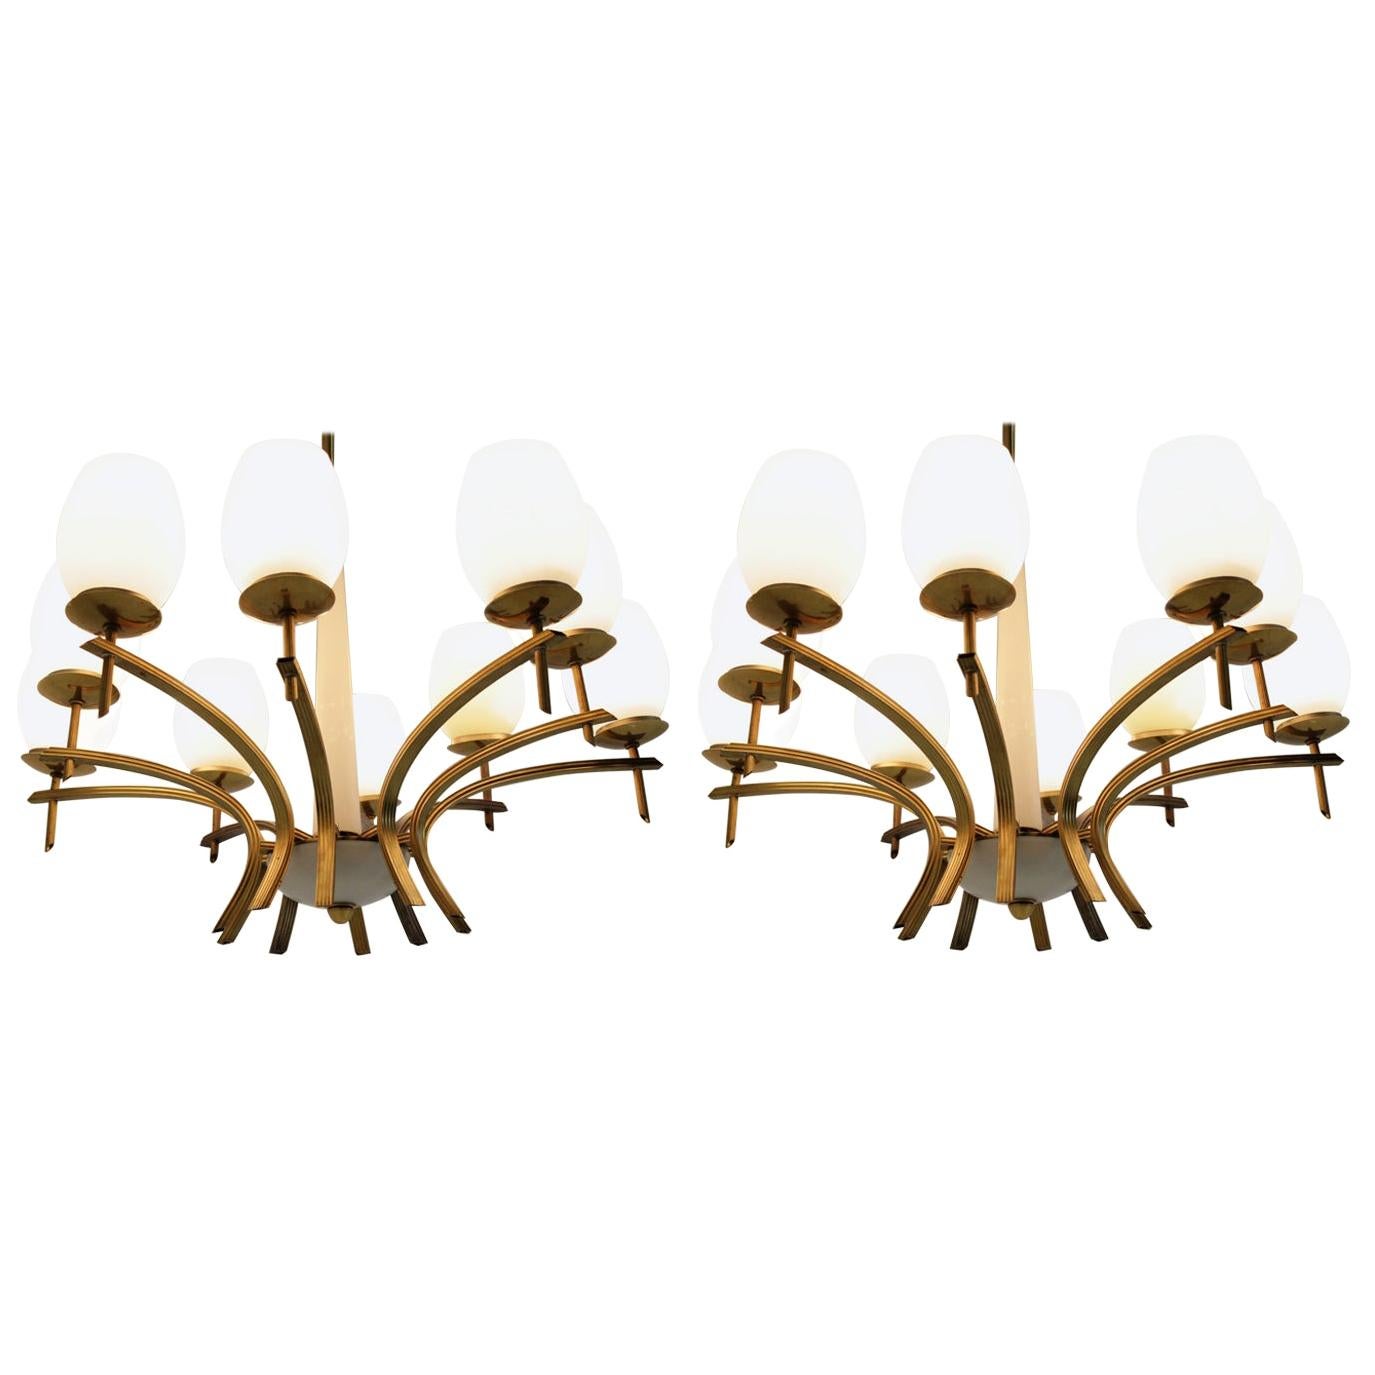 Pair of Unique Midcentury Large Brass Chandeliers, 1960 For Sale